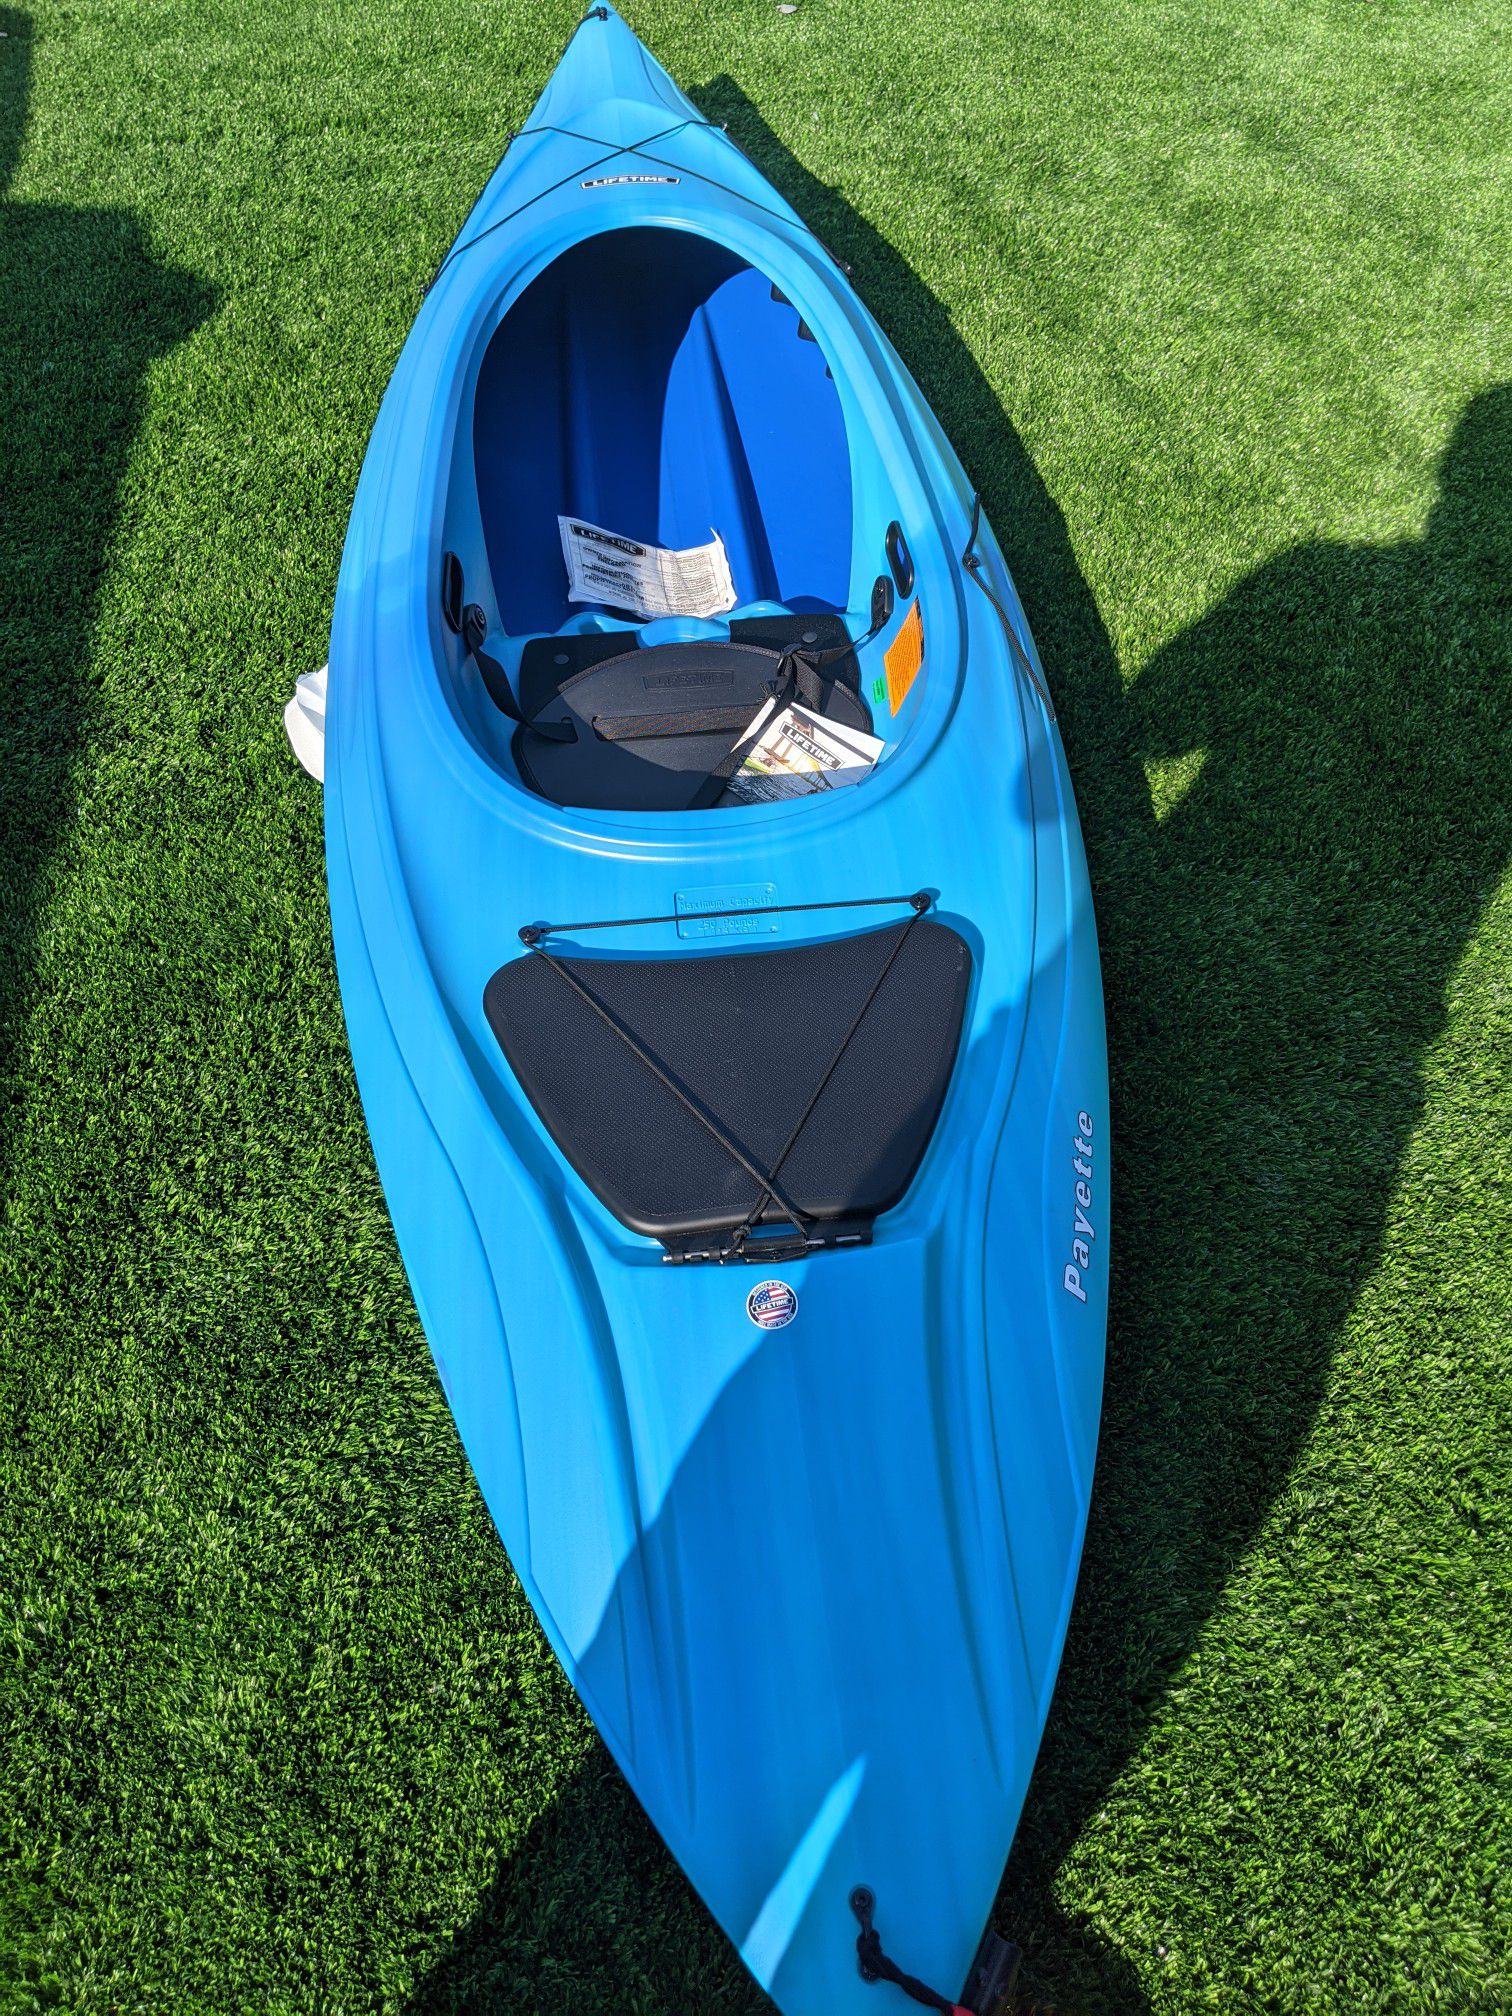 Two 10 ft kayaks (2 available). $350 each or both for $600